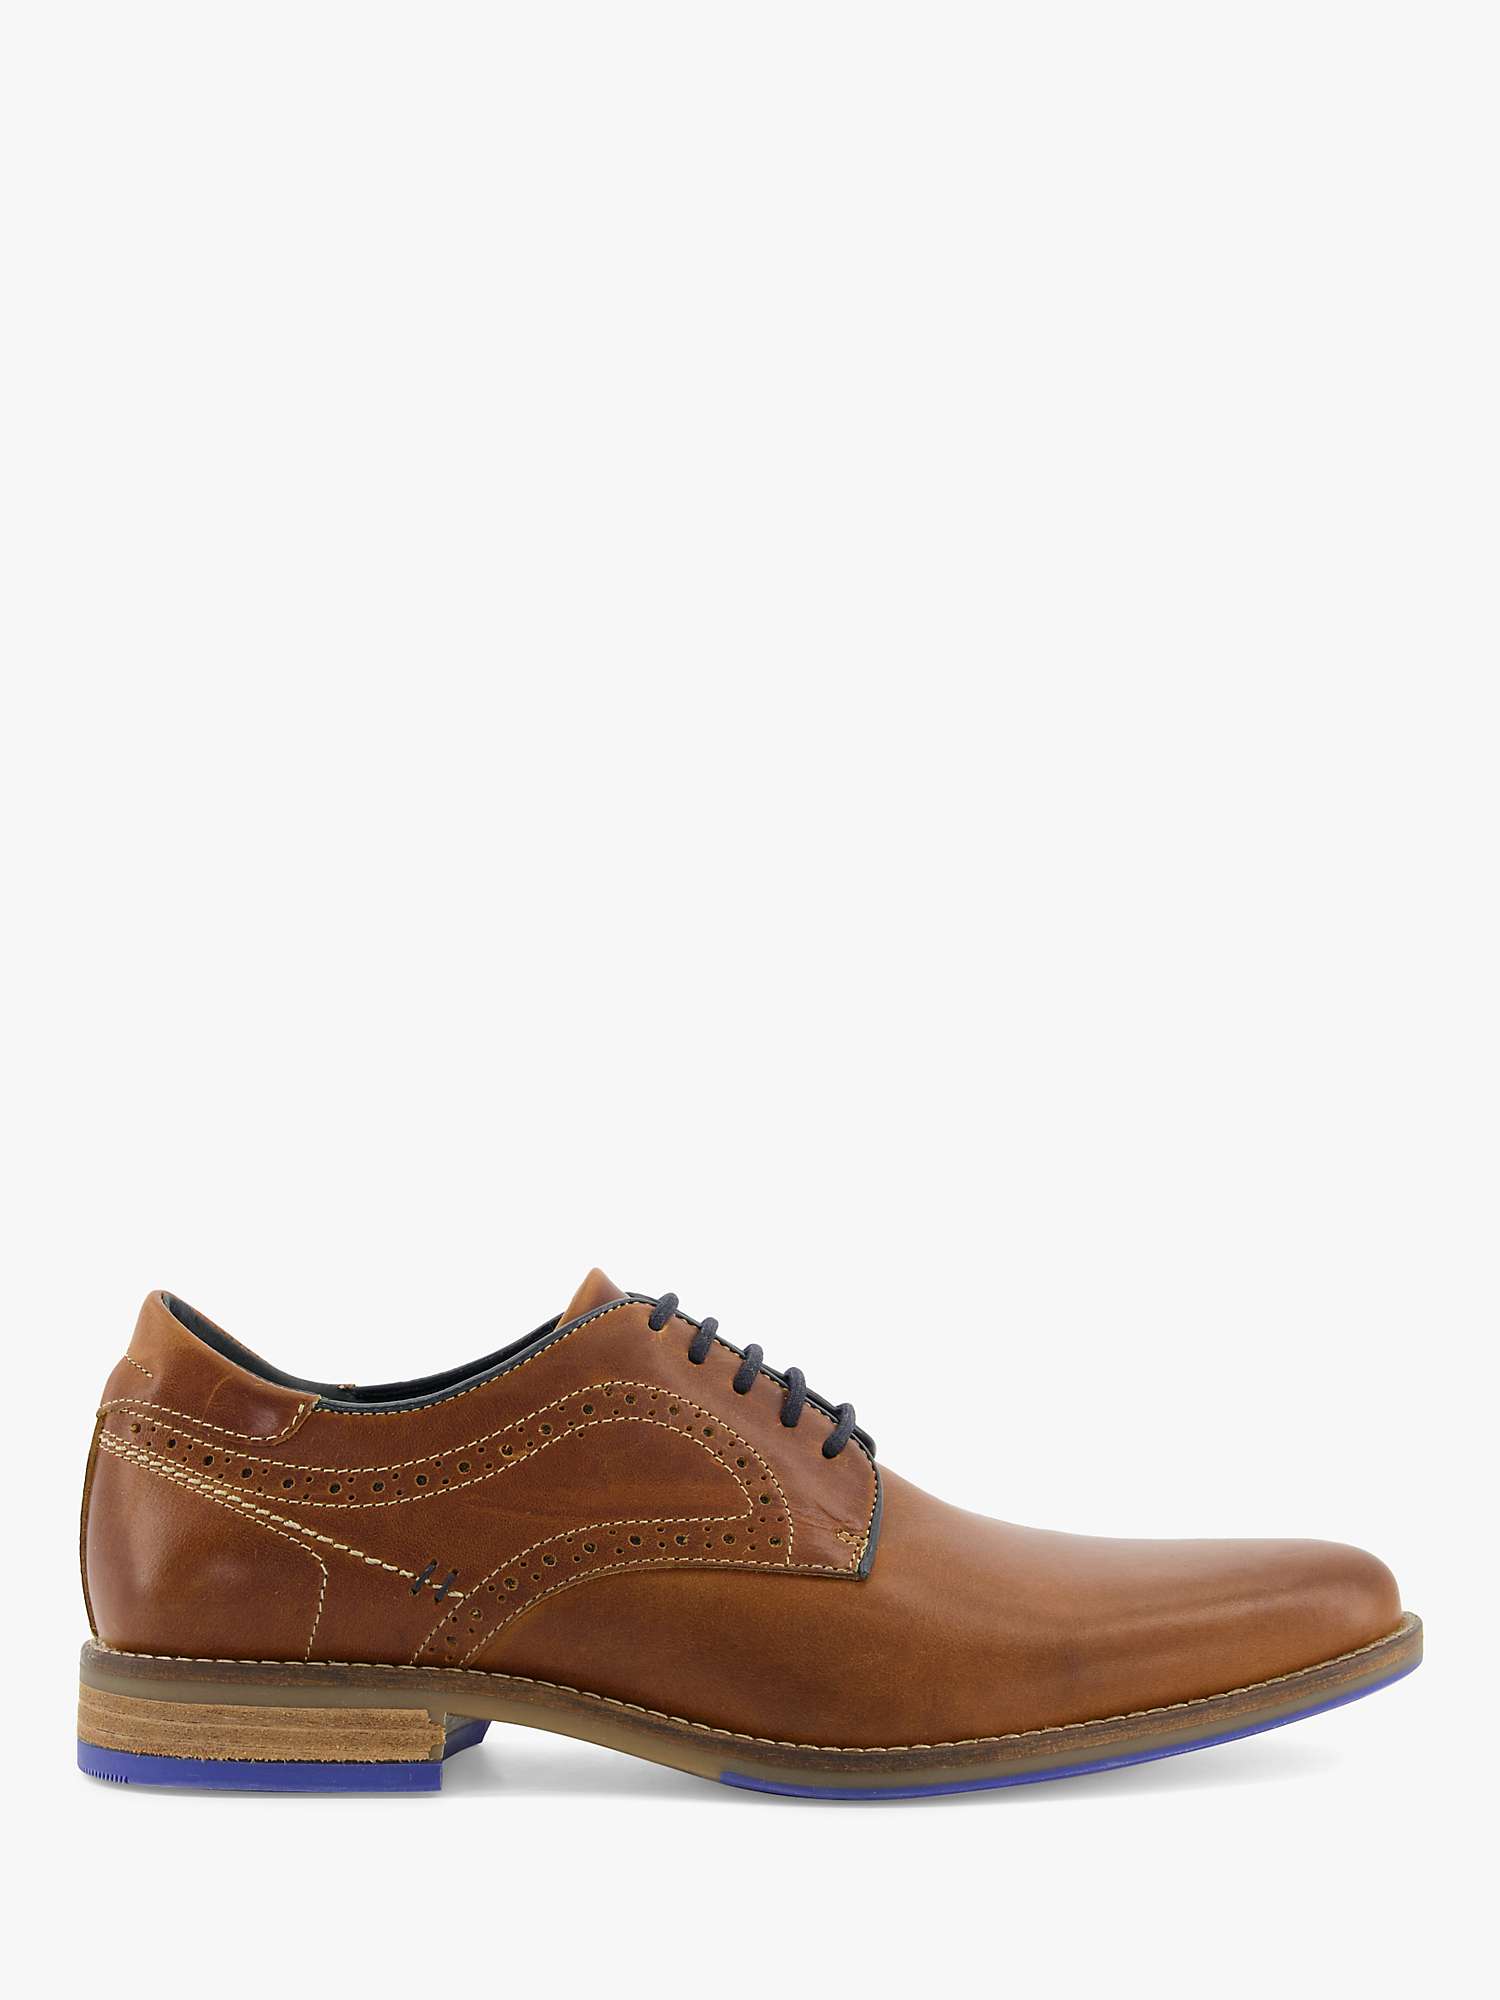 Buy Dune Wide Fit Bintom Leather Stitch Detail Derby Shoes, Tan Online at johnlewis.com